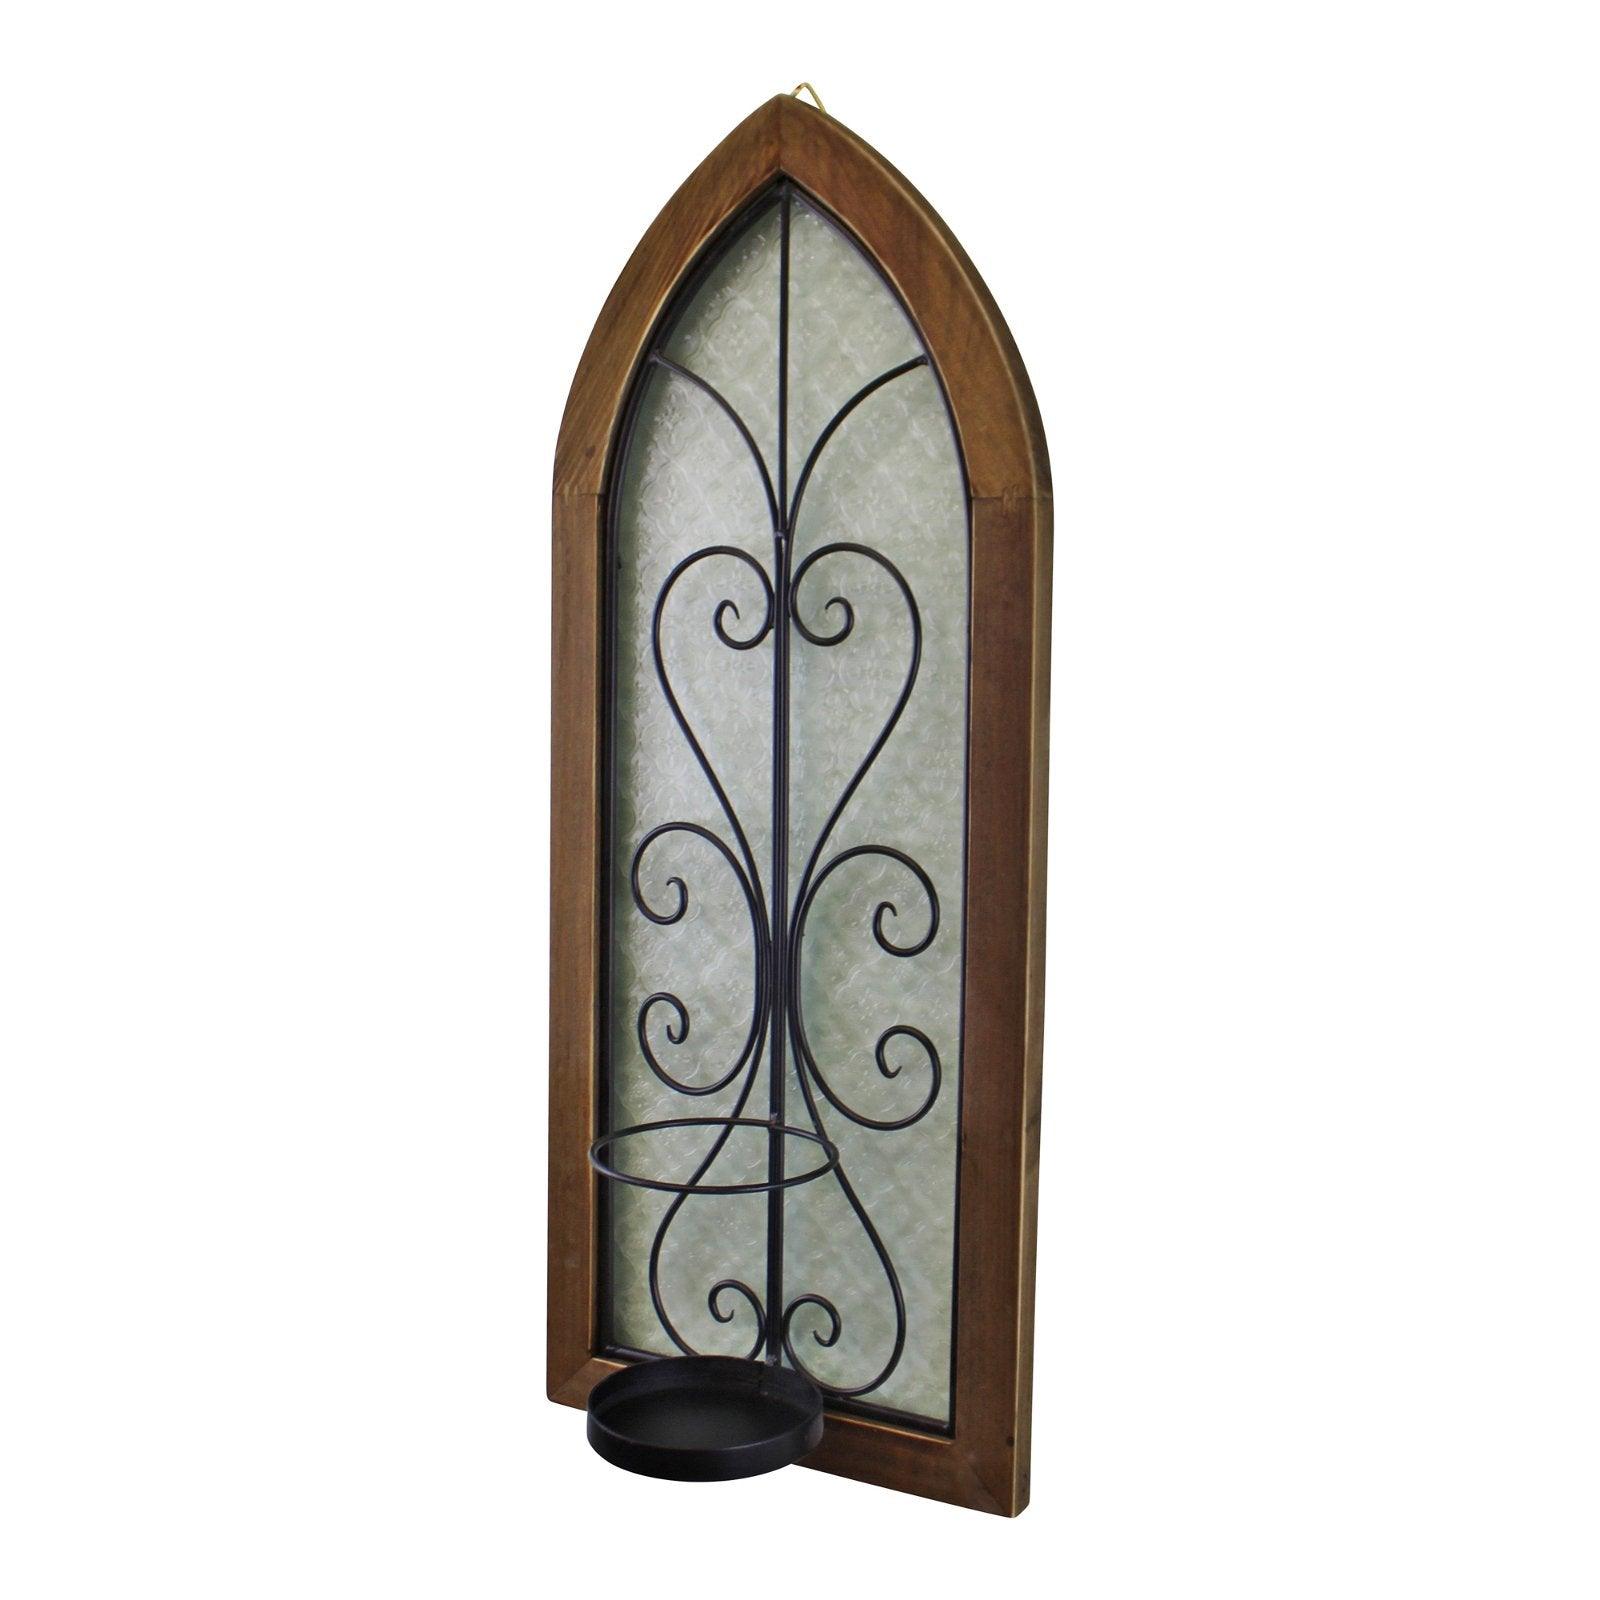 View Candle Wall Sconce Church Window Design information